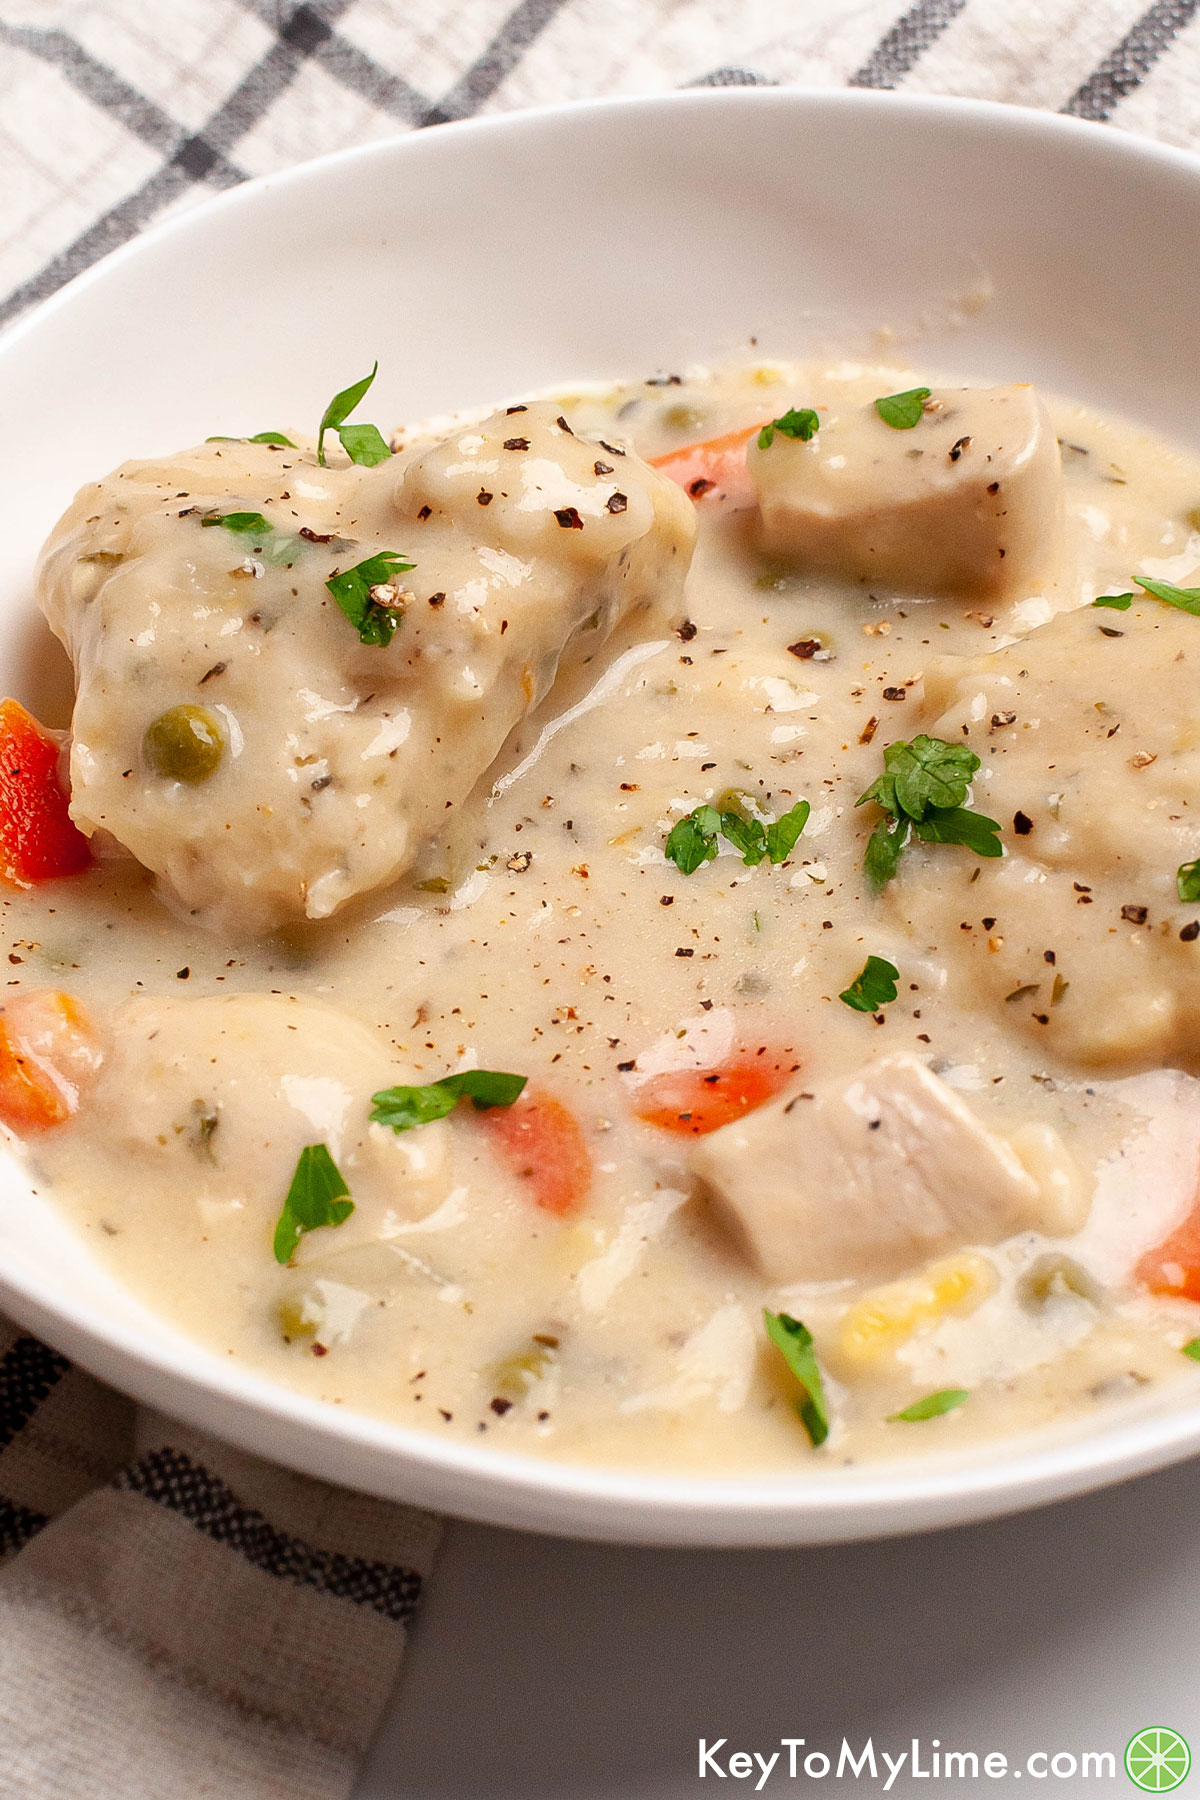 A side image of a bowl of Bisquick chicken and dumplings on a plaid napkin.